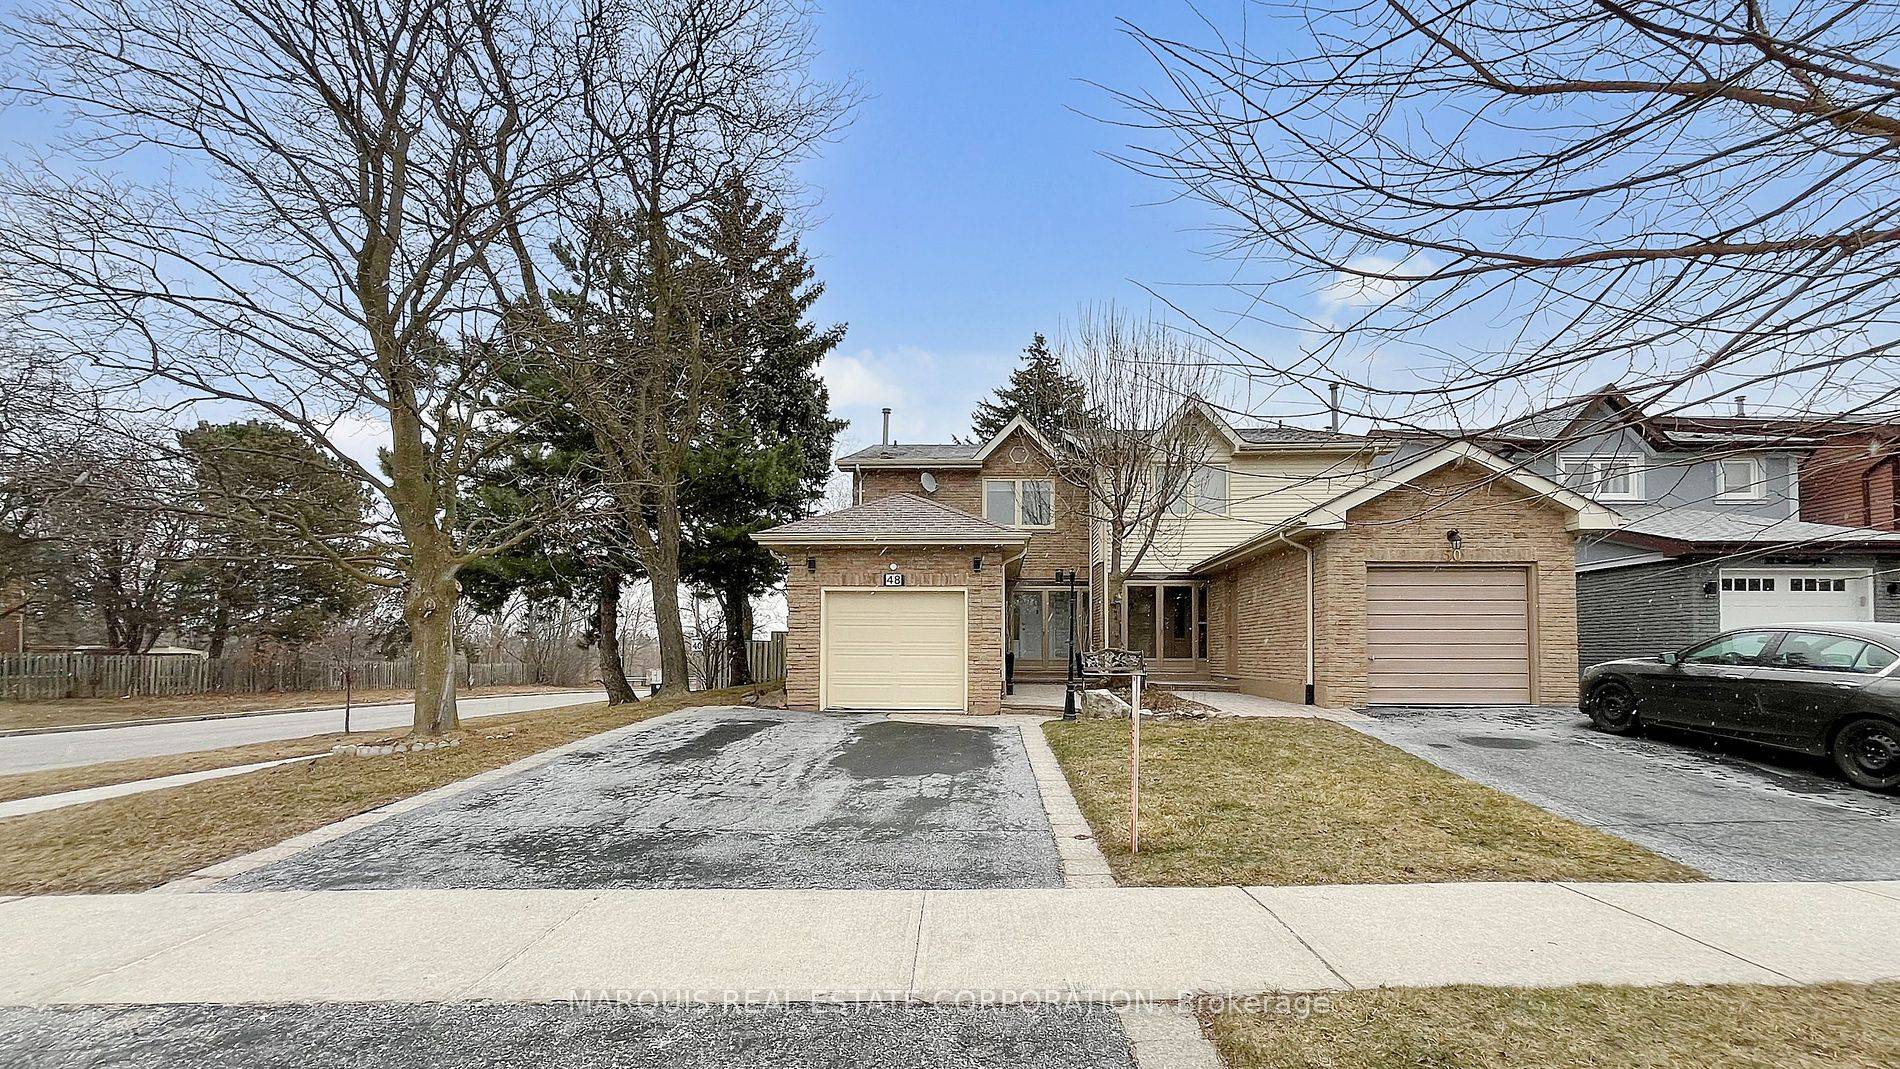 Large semi detached live like a detached with huge corner lot enclosed back yard with deck, lighting, and more three bedroom with basement family room with fireplace and more with ...